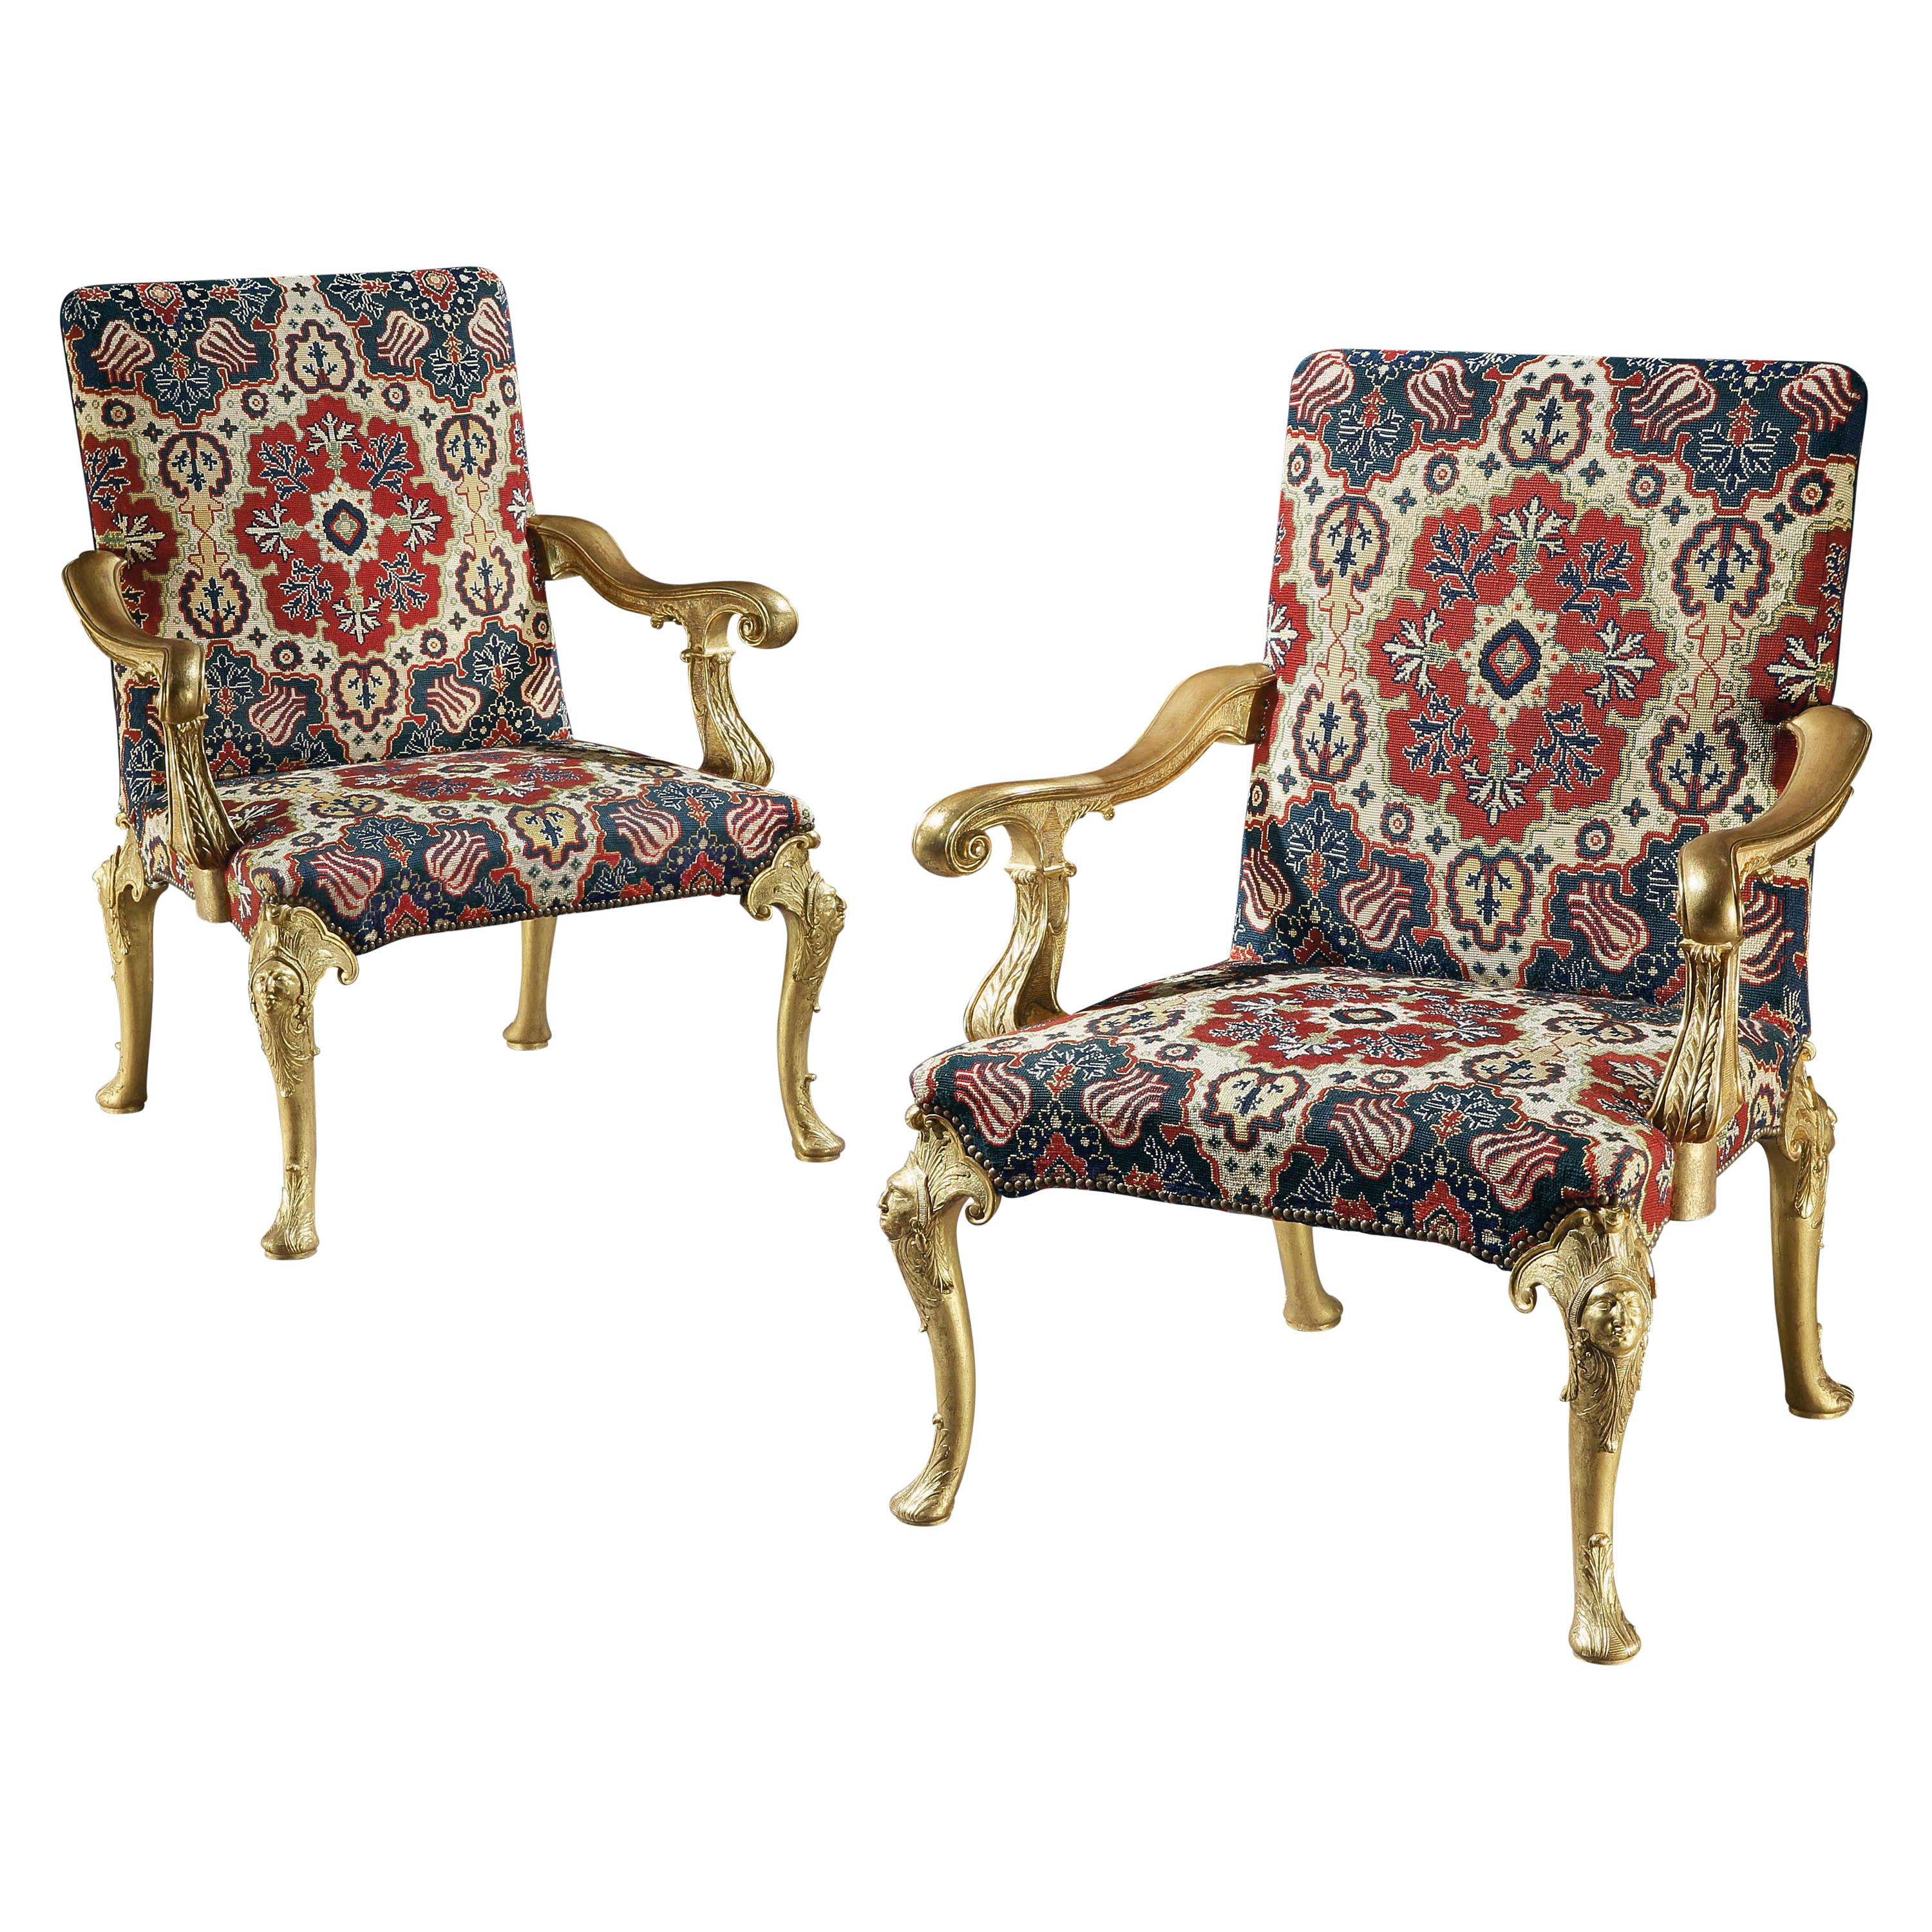 Lord Monson's, Wanstead House Chairs a Pair of George I Carved & Gilded Armchair